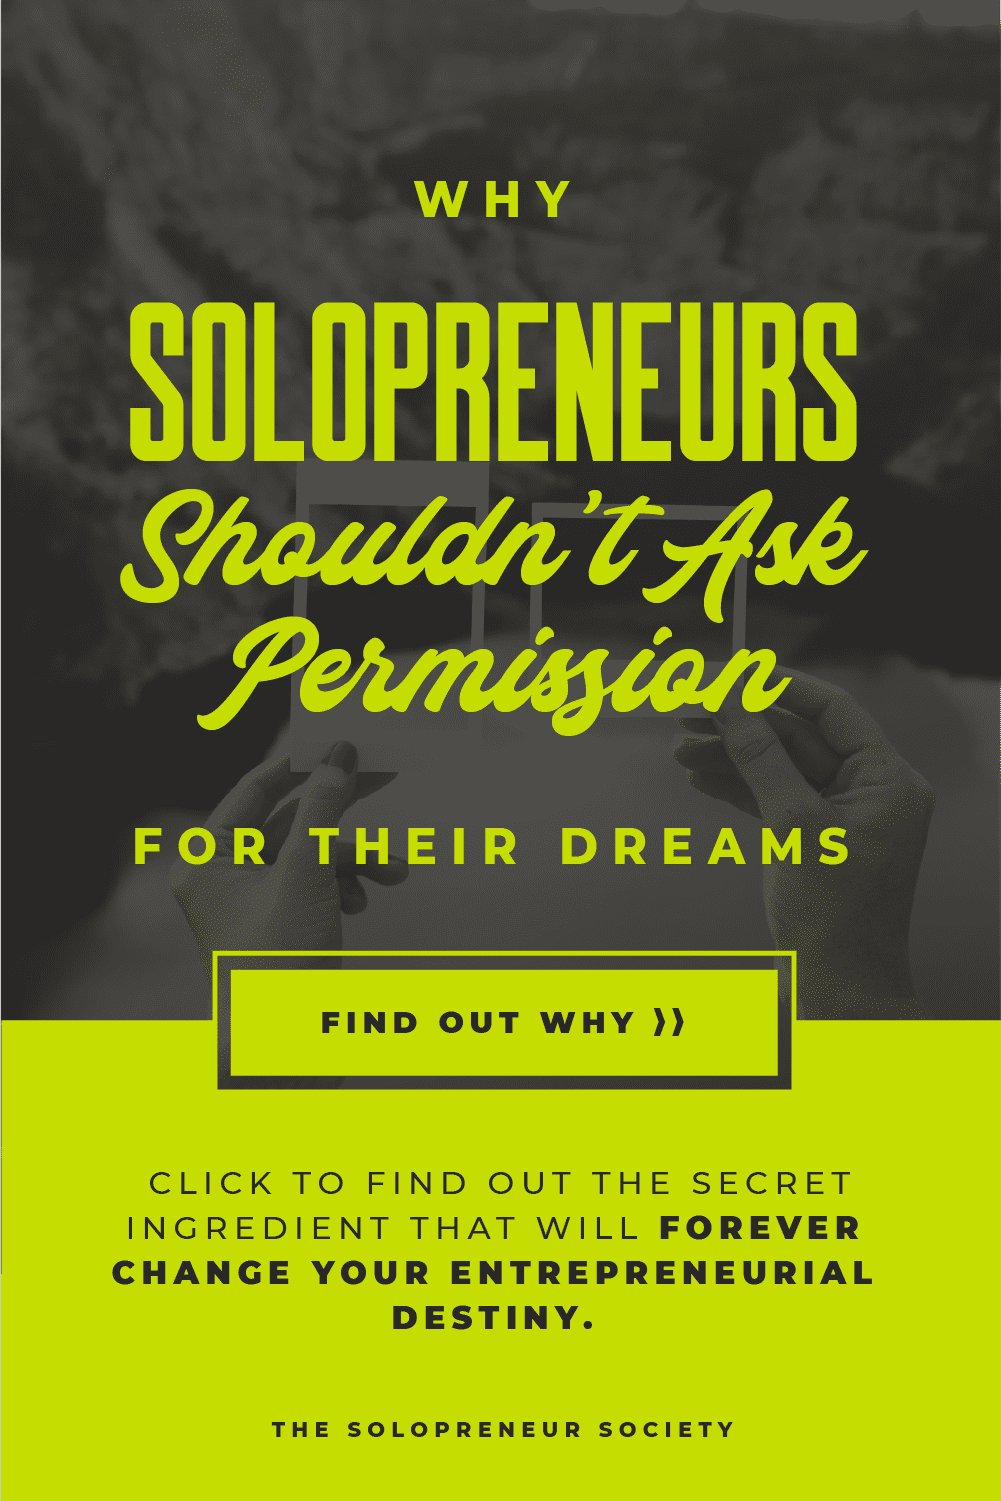 Solopreneur Success Boils Down to This One Trait